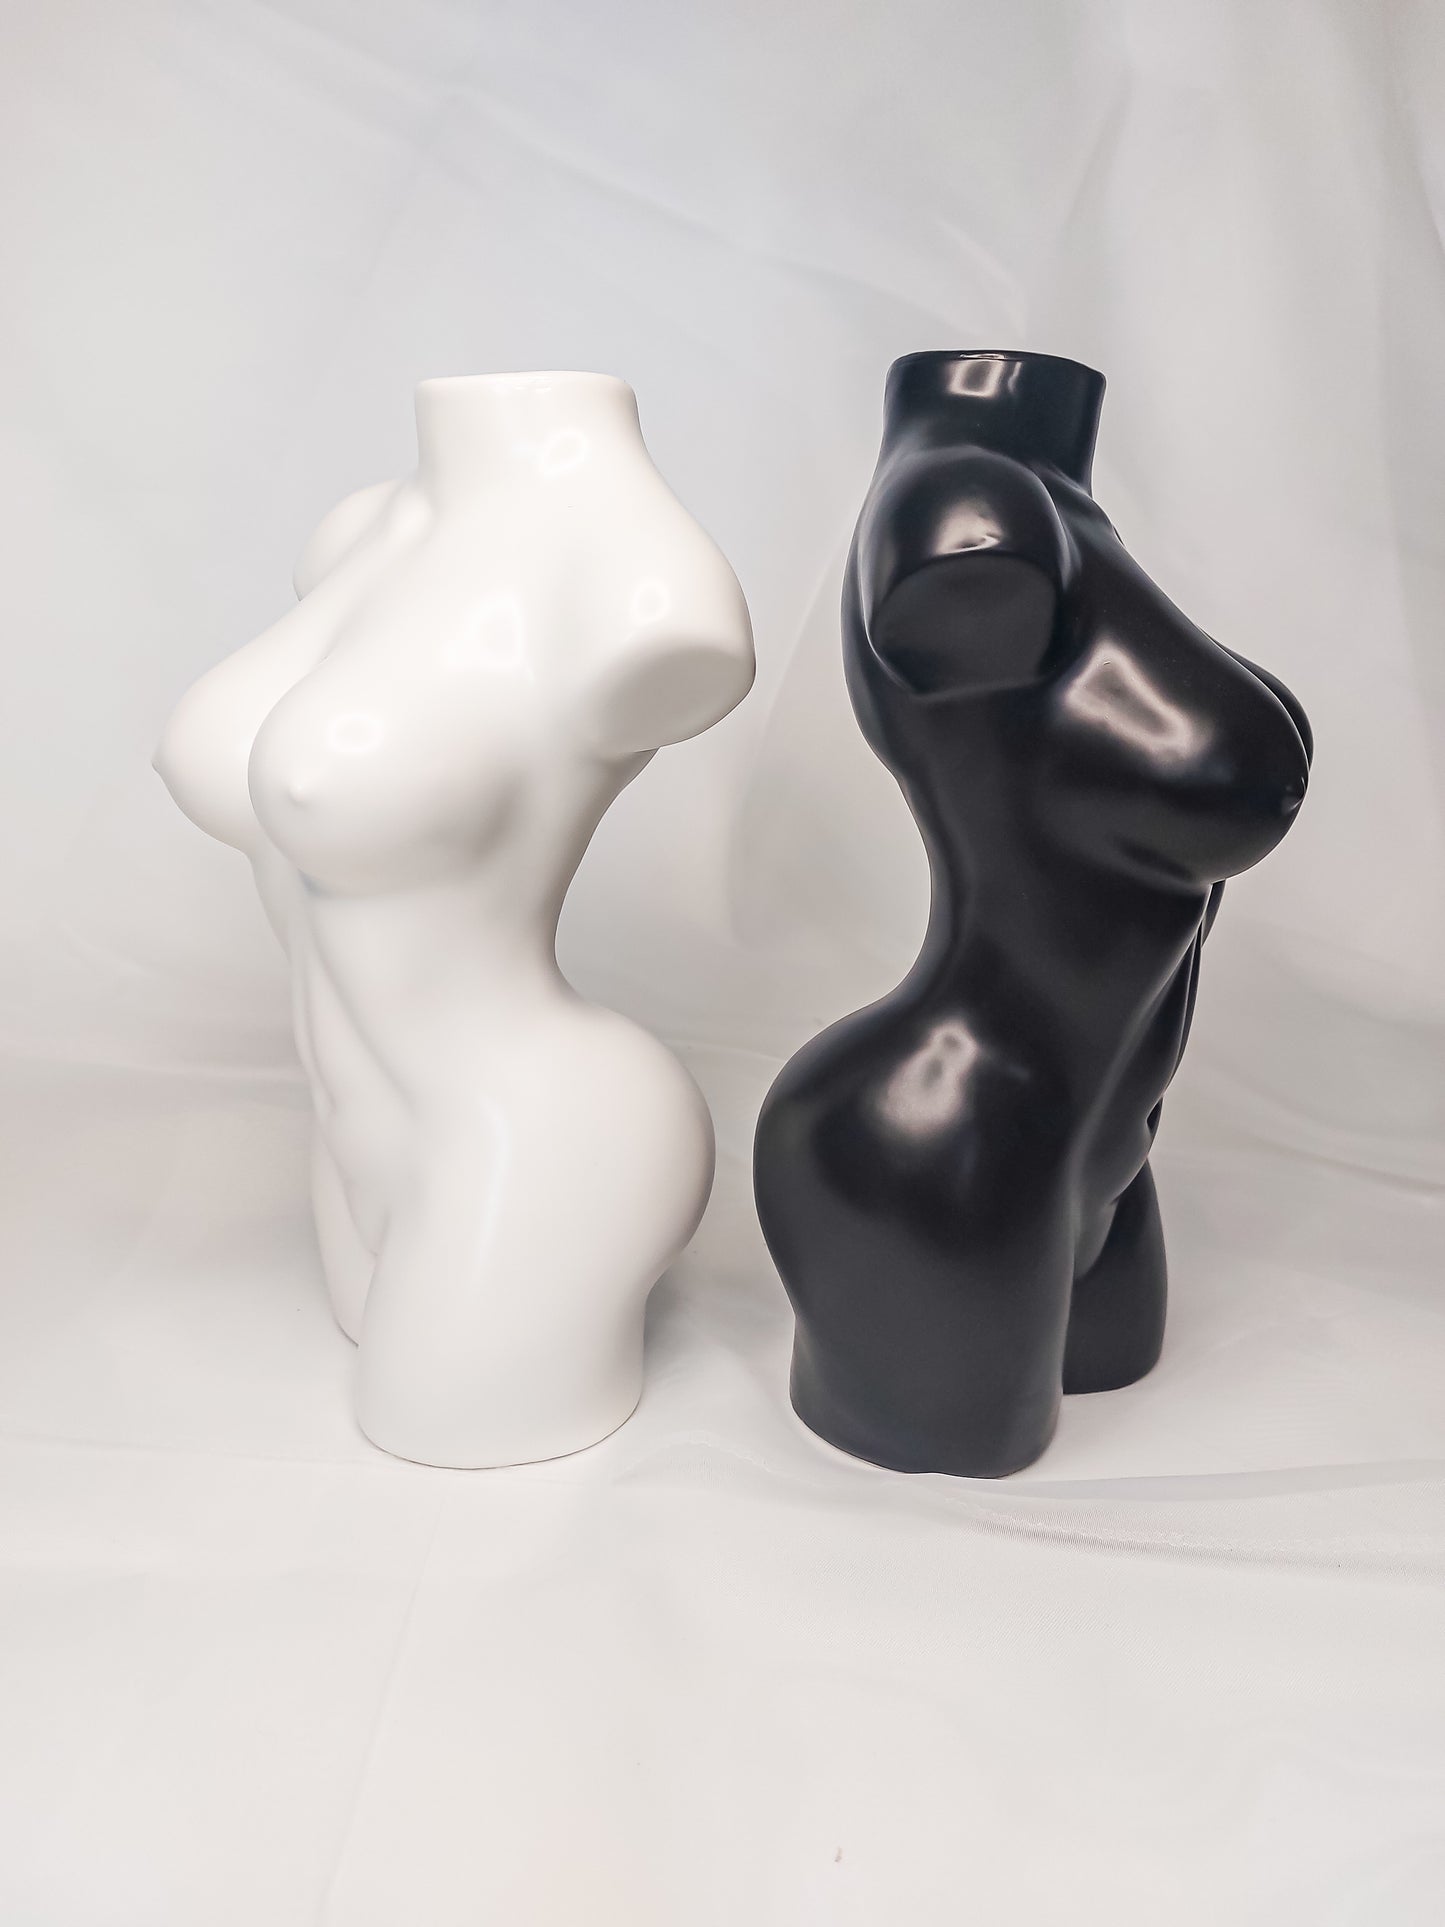 The Ultimate Woman Body Vase